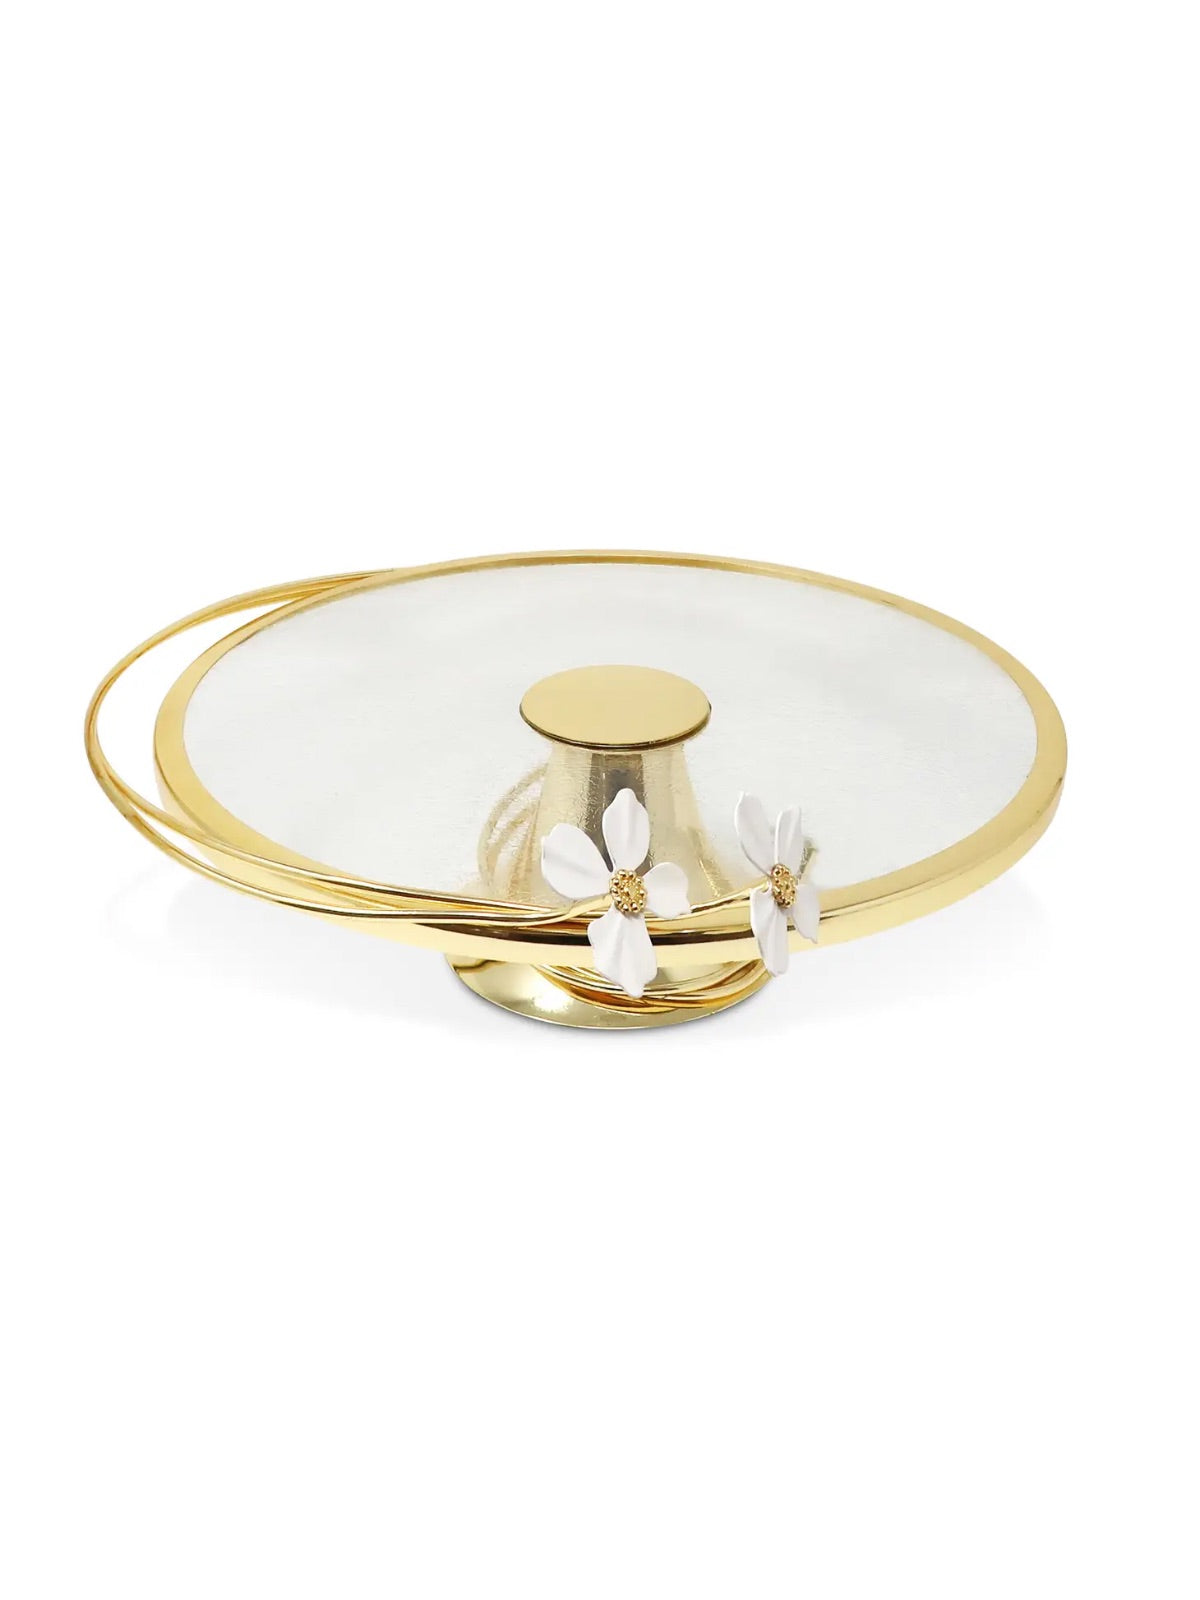 Gold Cake Stand without Glass Cover and Jewel Flower Embellishment - Sold by KYA Home Decor.